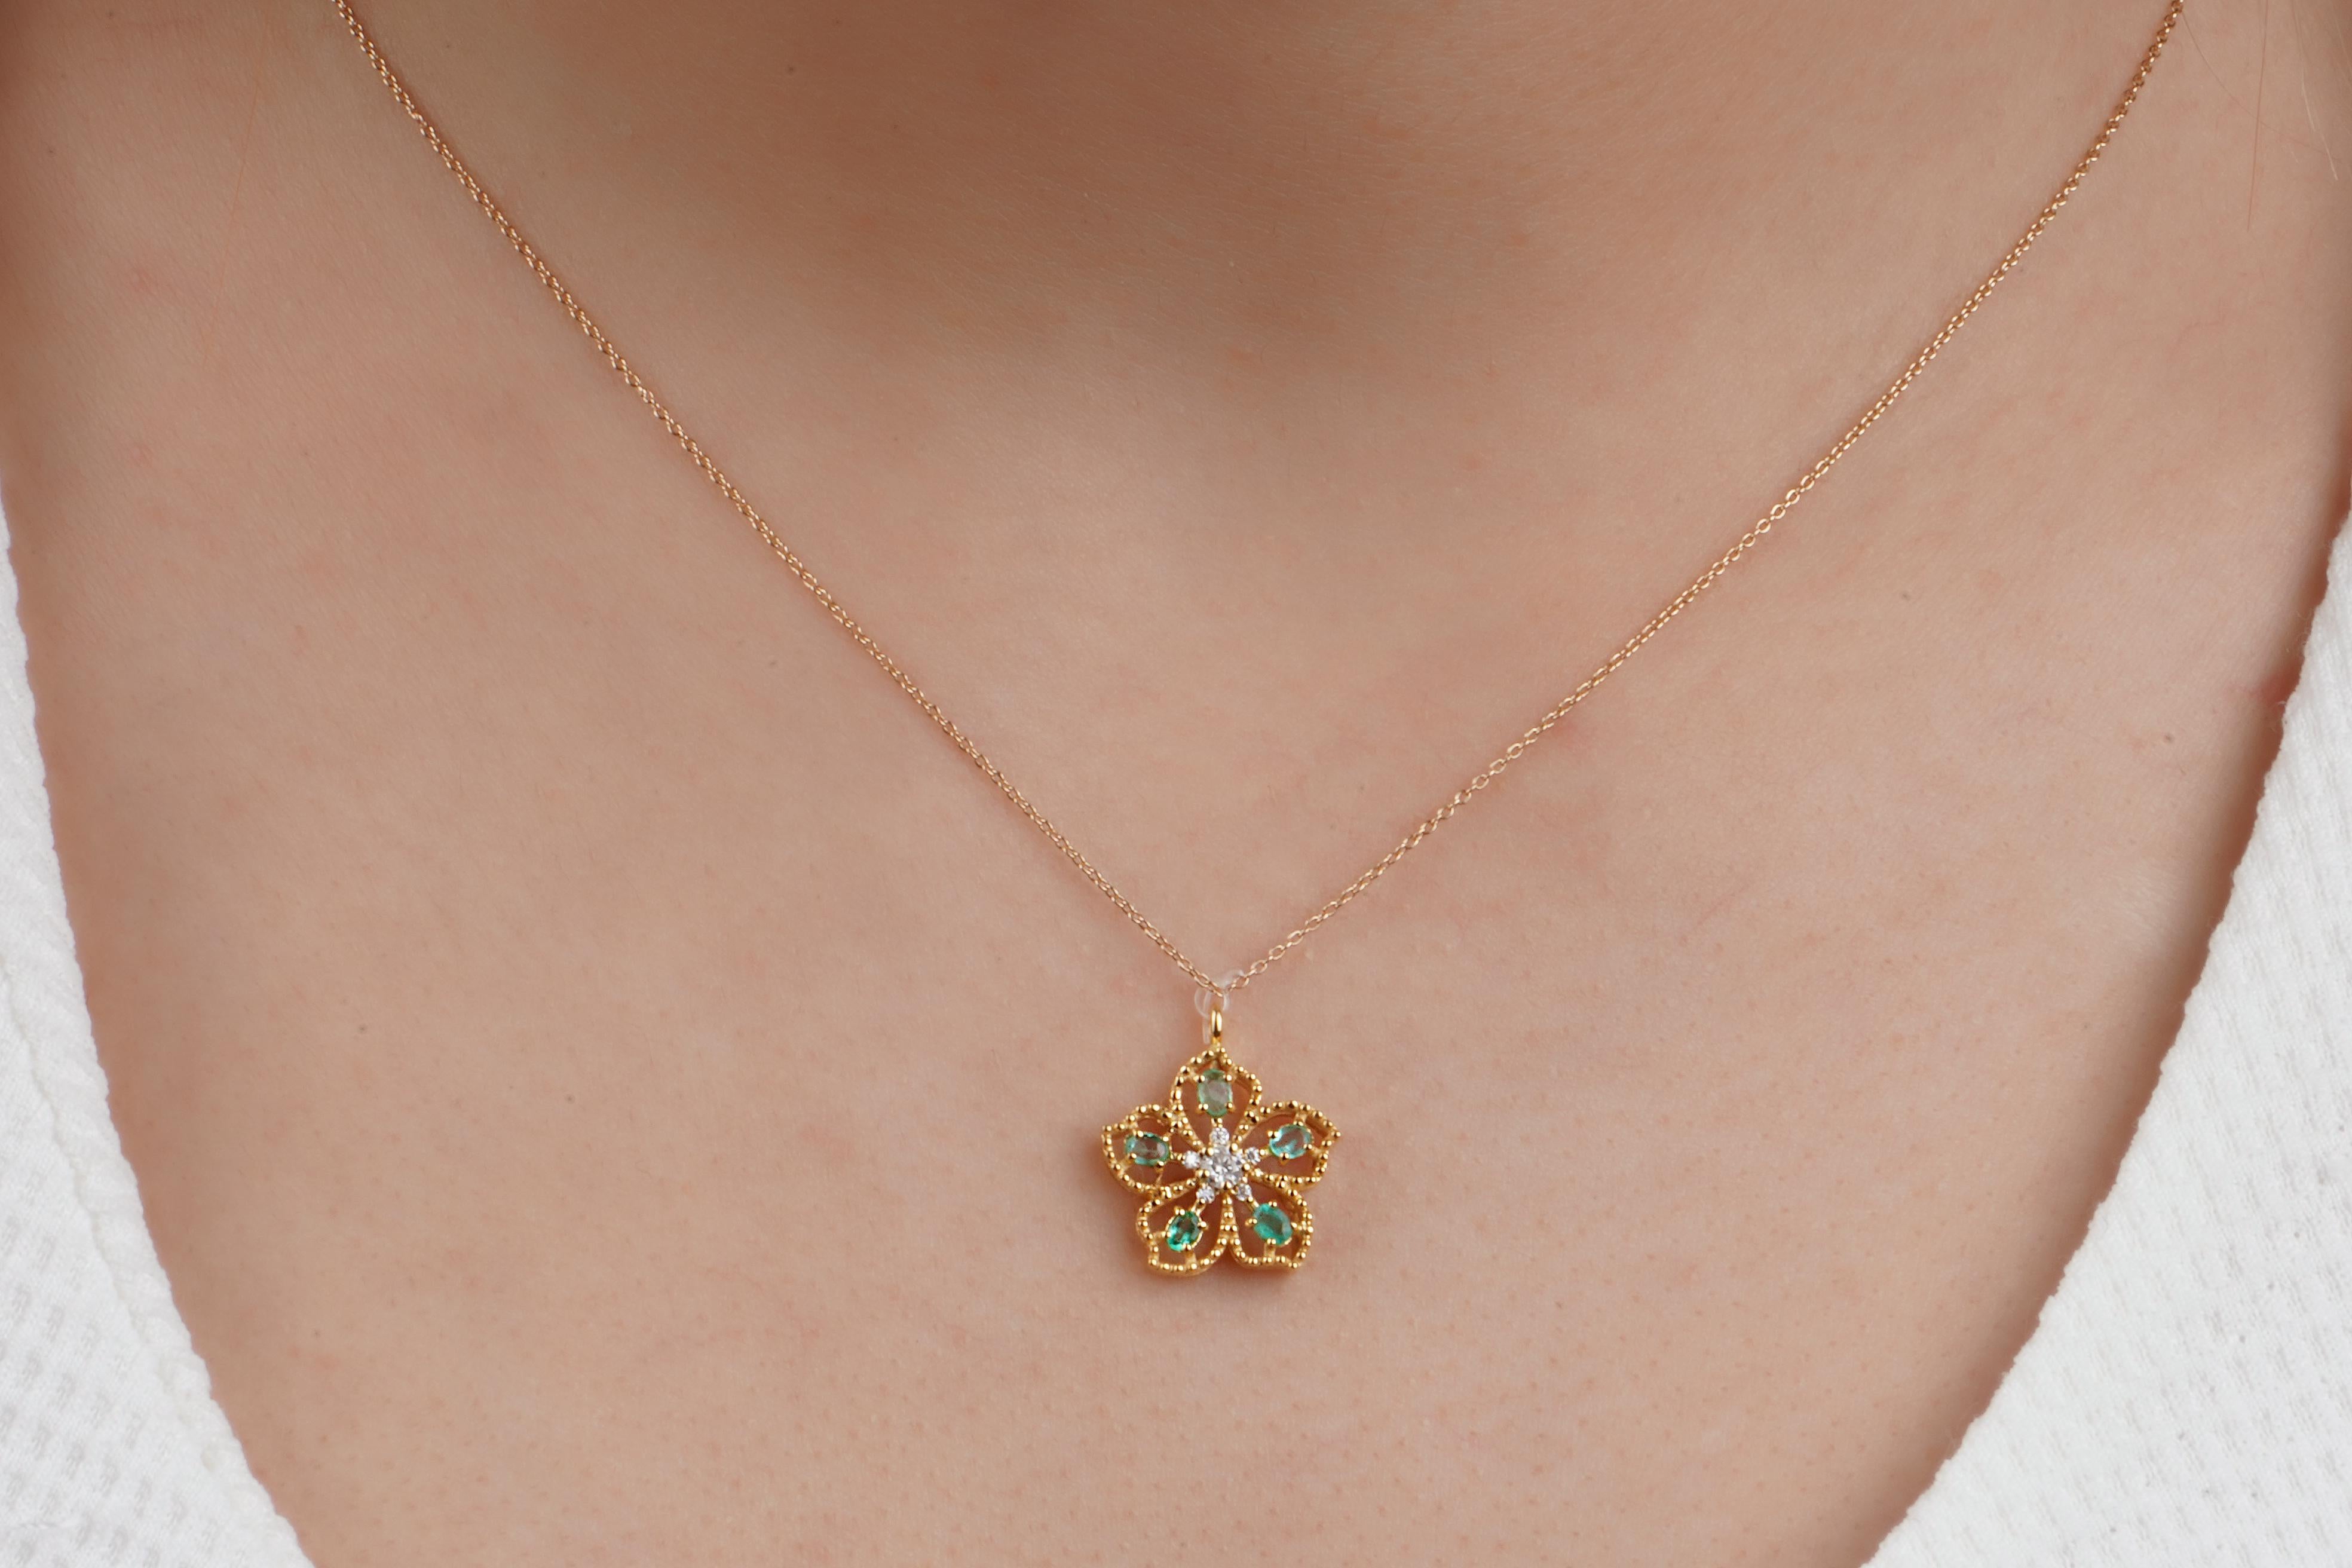 Are you looking for a unique and elegant gift for your loved one? Do you want to impress them with a stunning piece of jewellery that reflects their beauty and personality? If so, you will love the ethernal emerald pendant from our exclusive